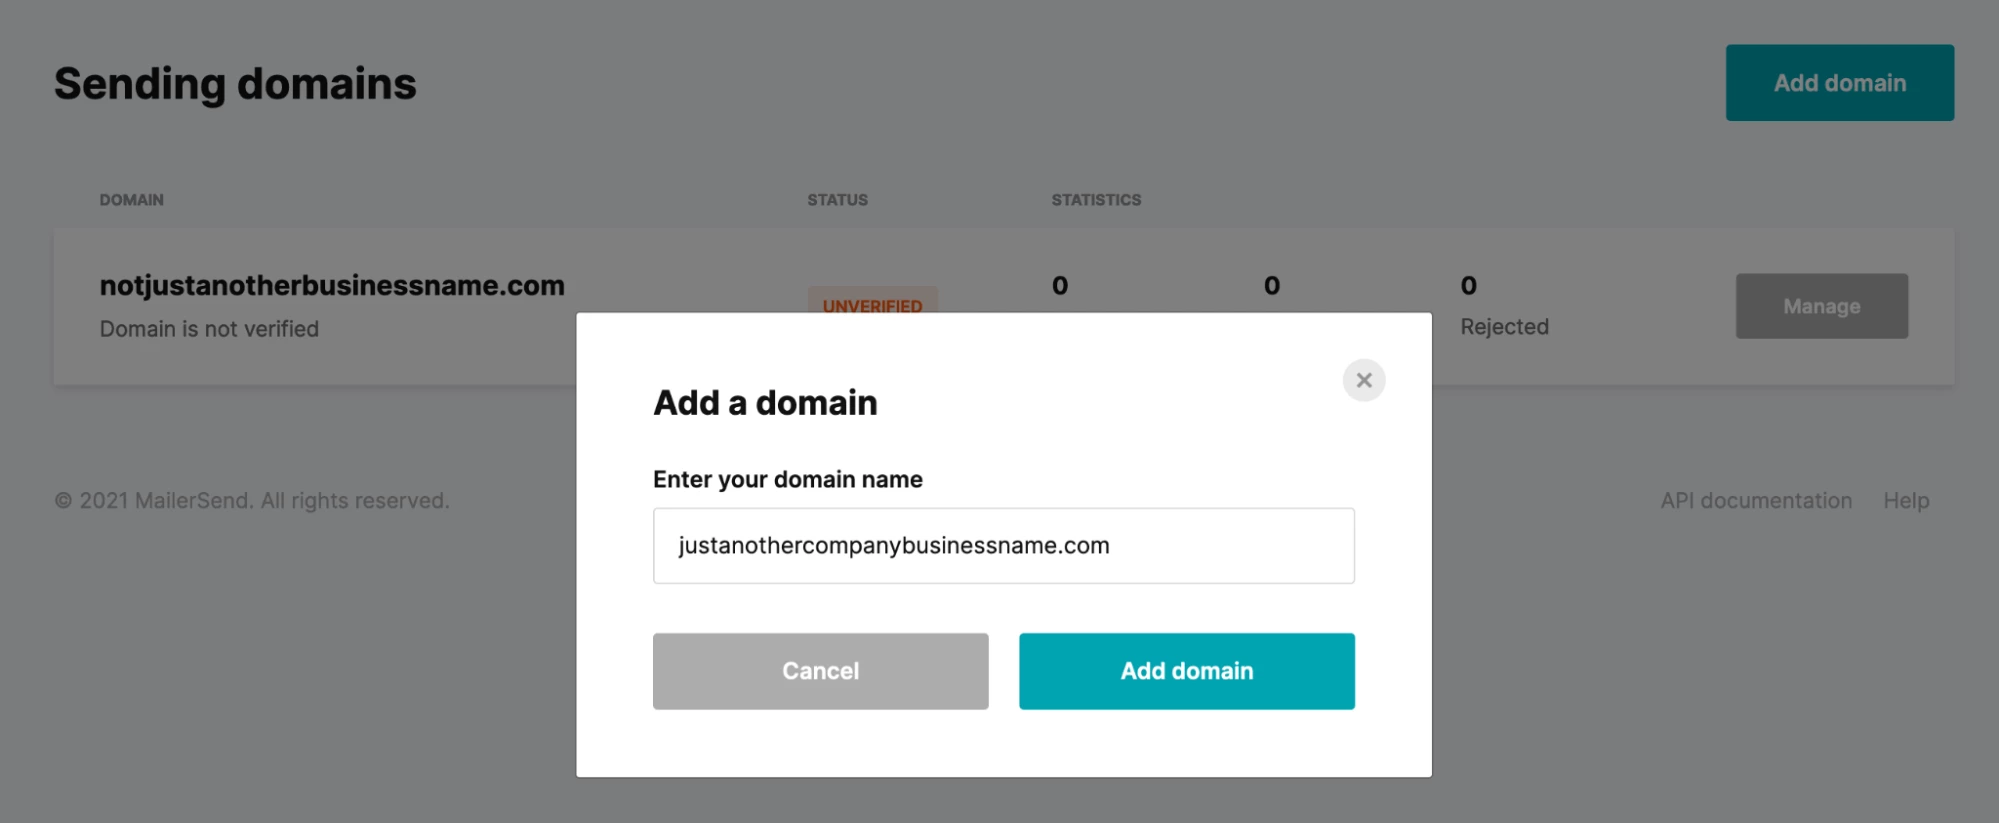 Add new domain to existing domains